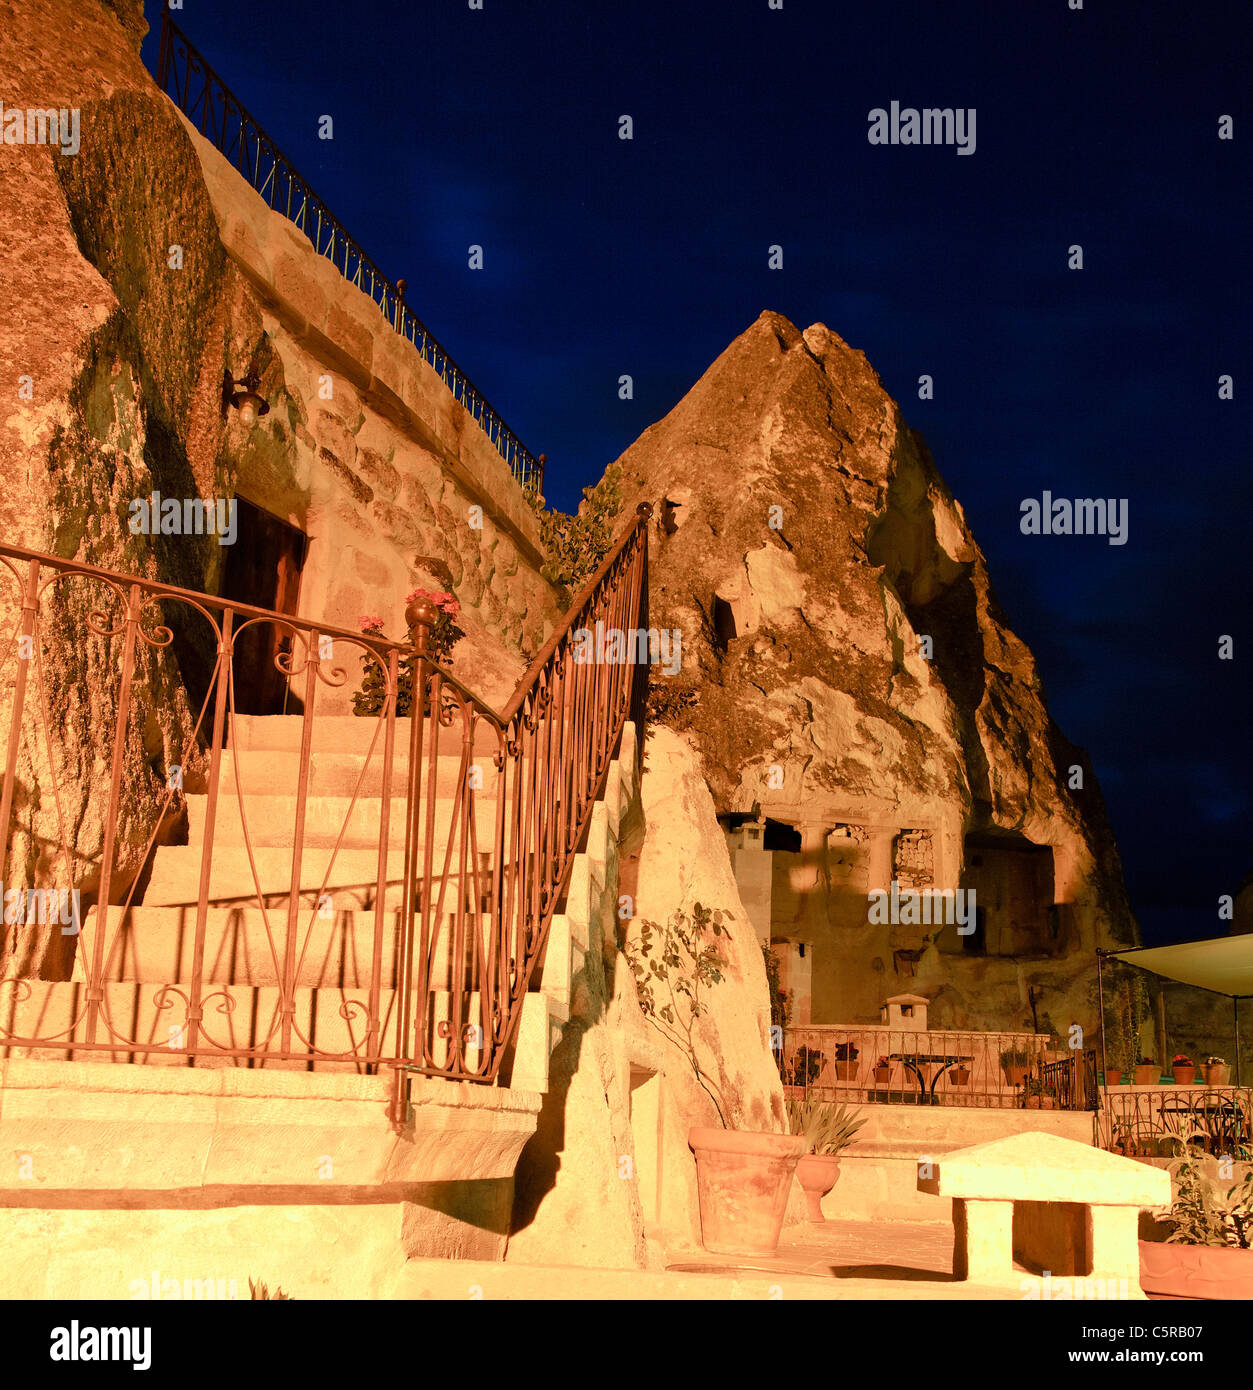 steps and hand rail of a cave house in Goreme, square format, night scene, architectural detail of outdoor staircase Stock Photo